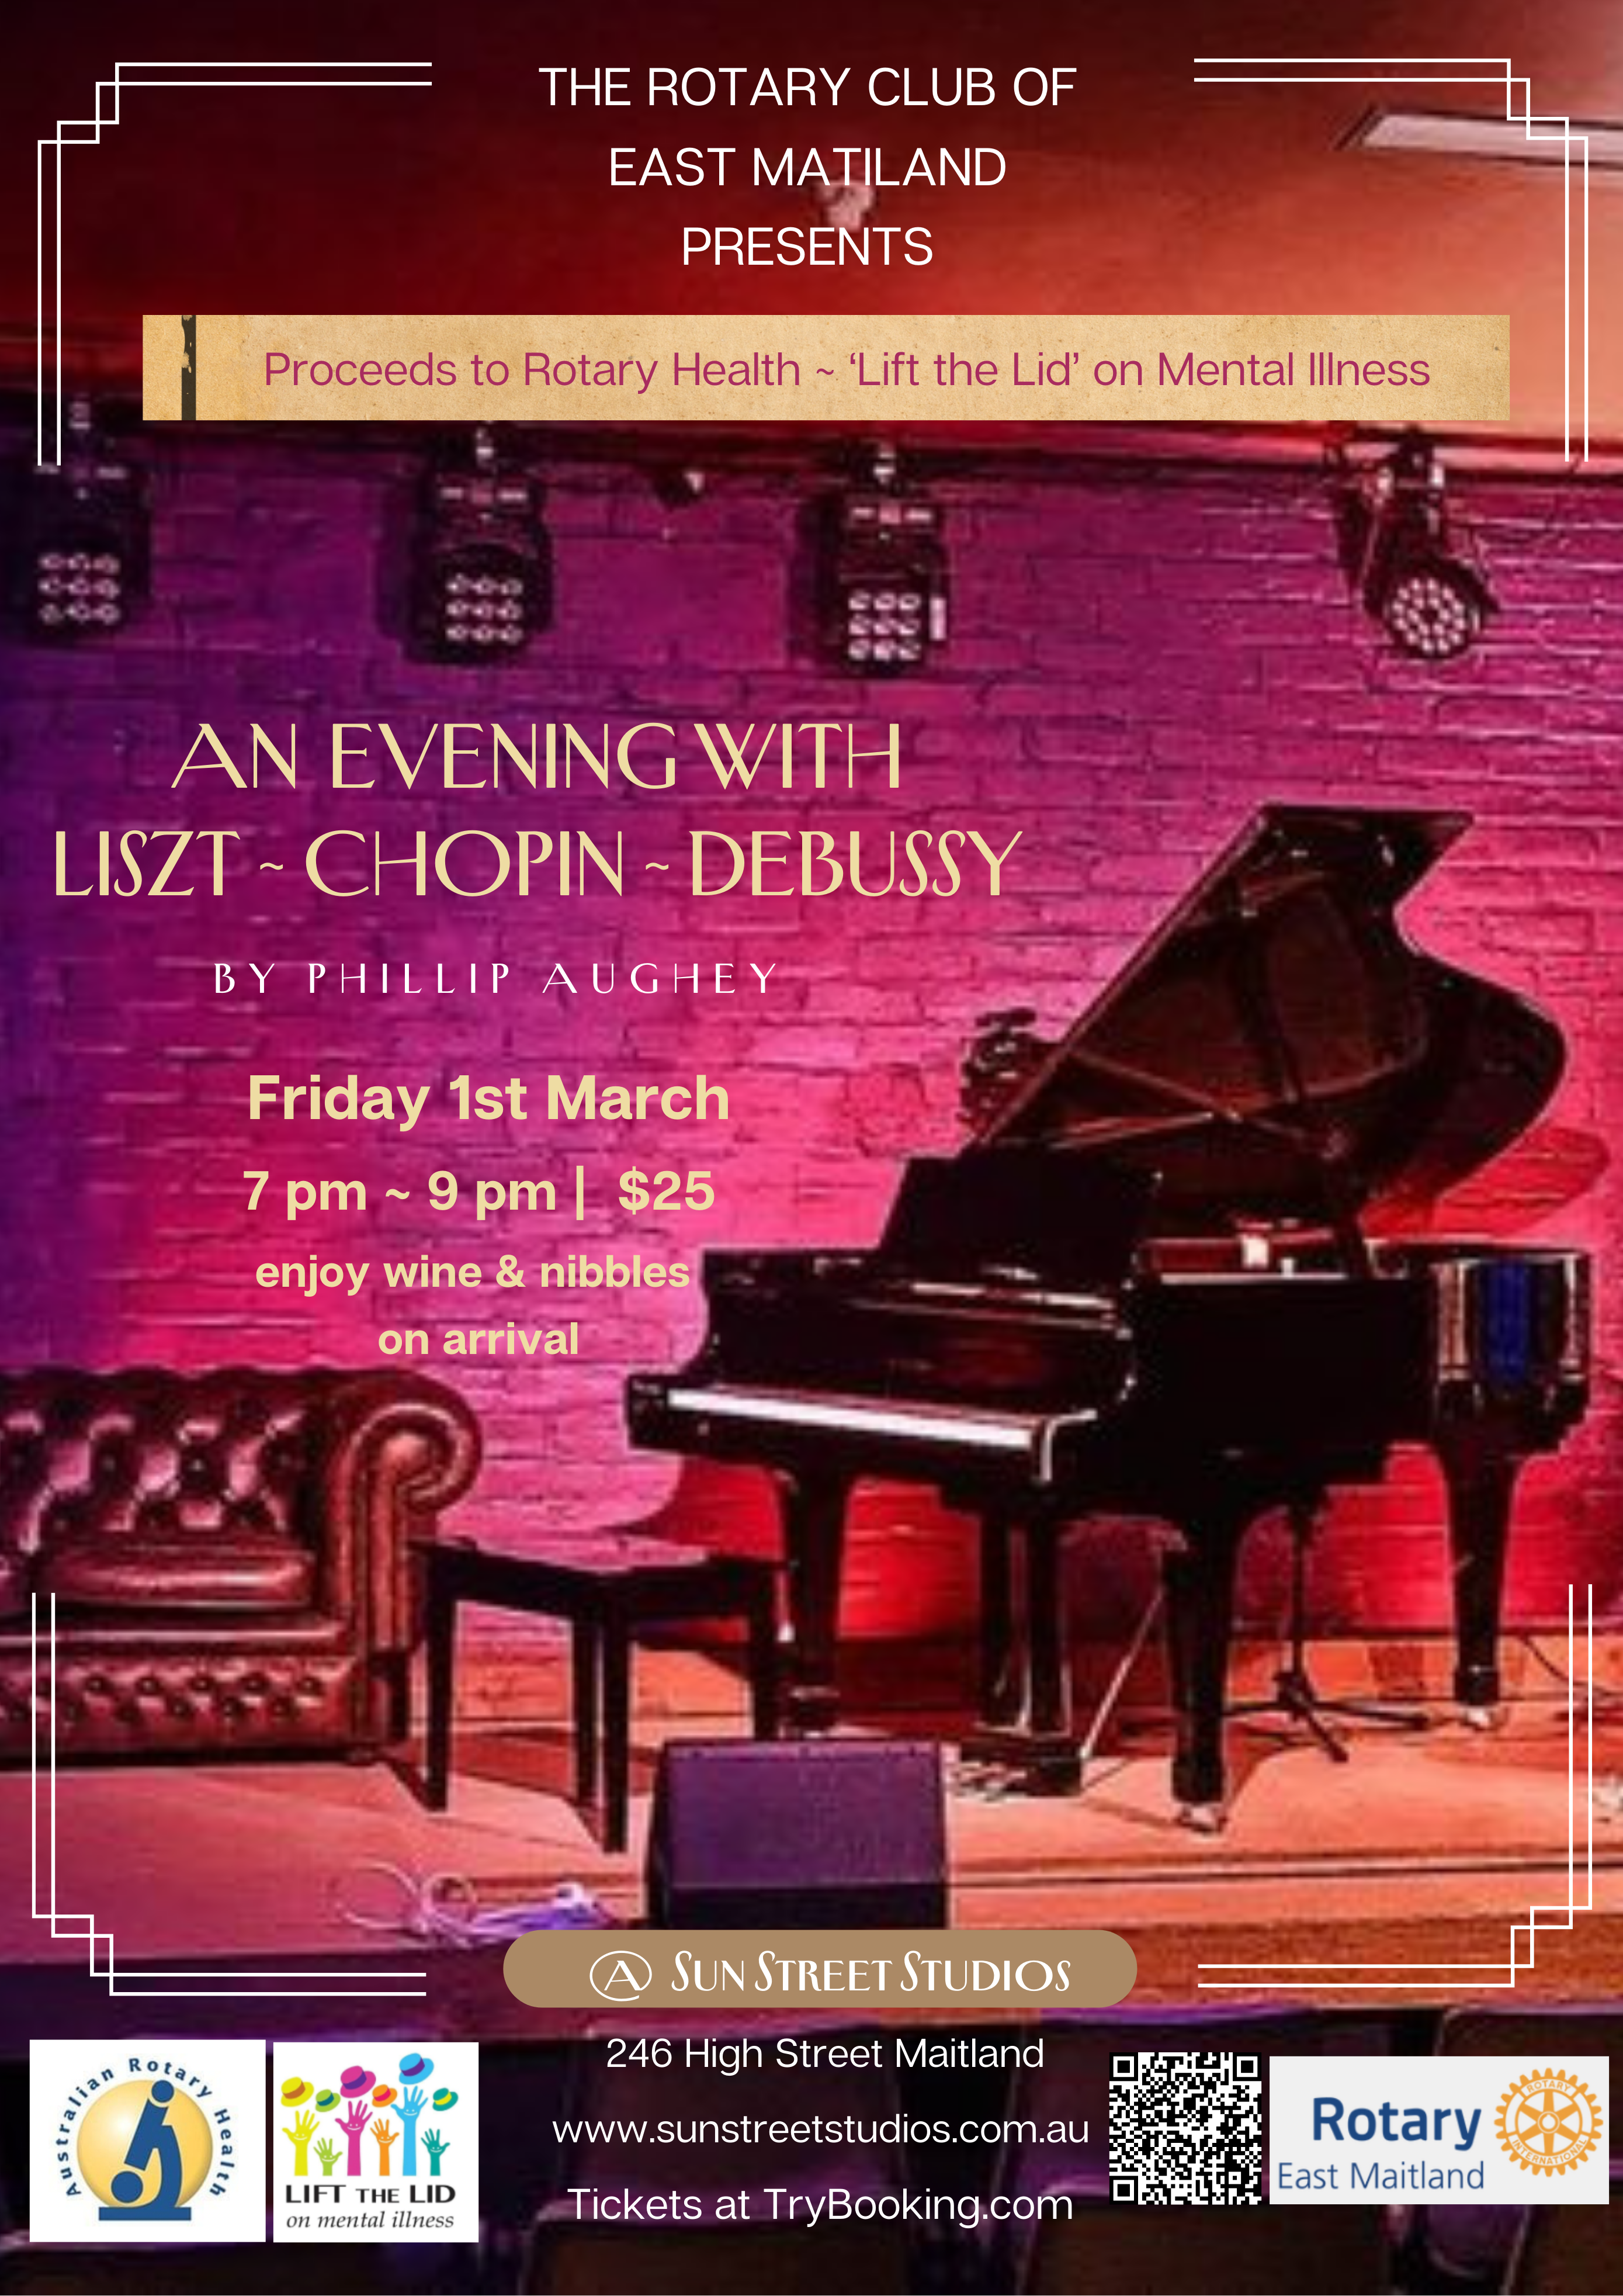 An Evening with Liszt ~ Chopin ~ Debussy with Phillip Aughey